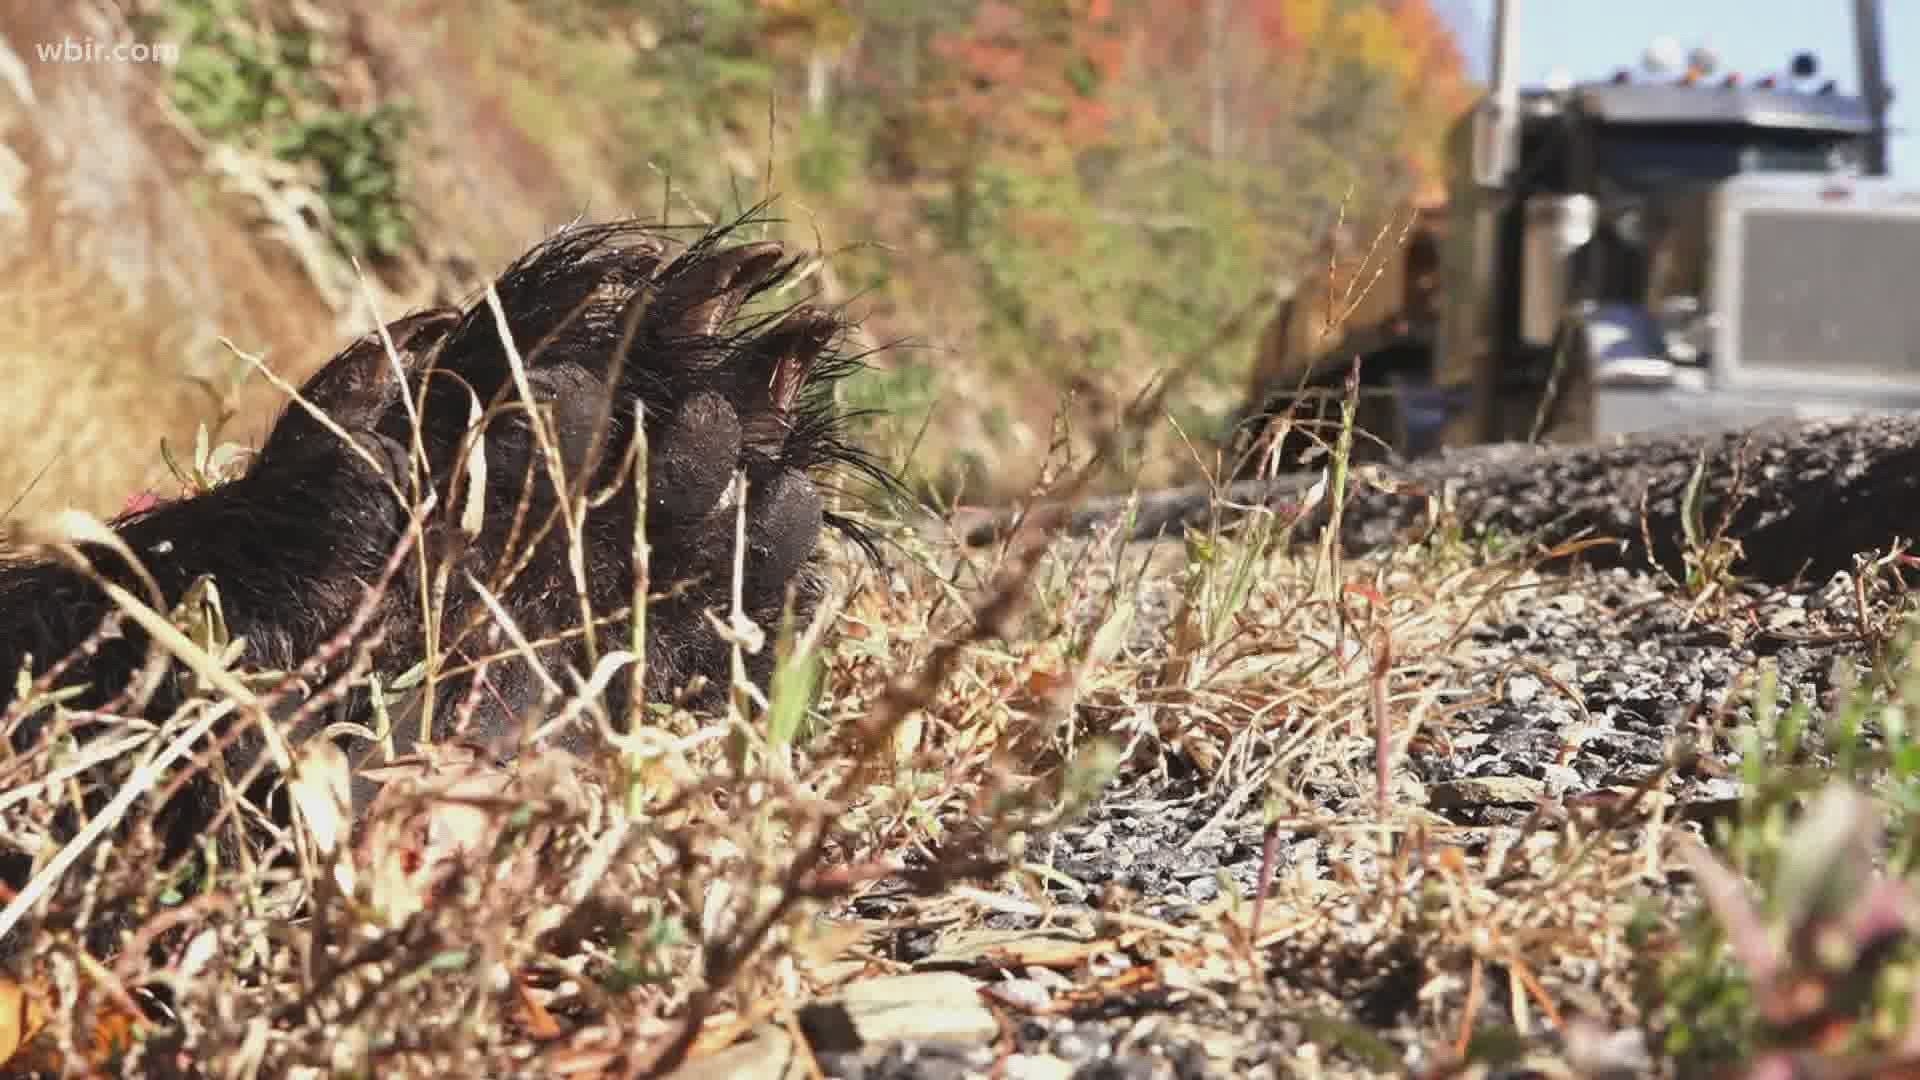 The concrete barriers have often led to more bear deaths according to experts.